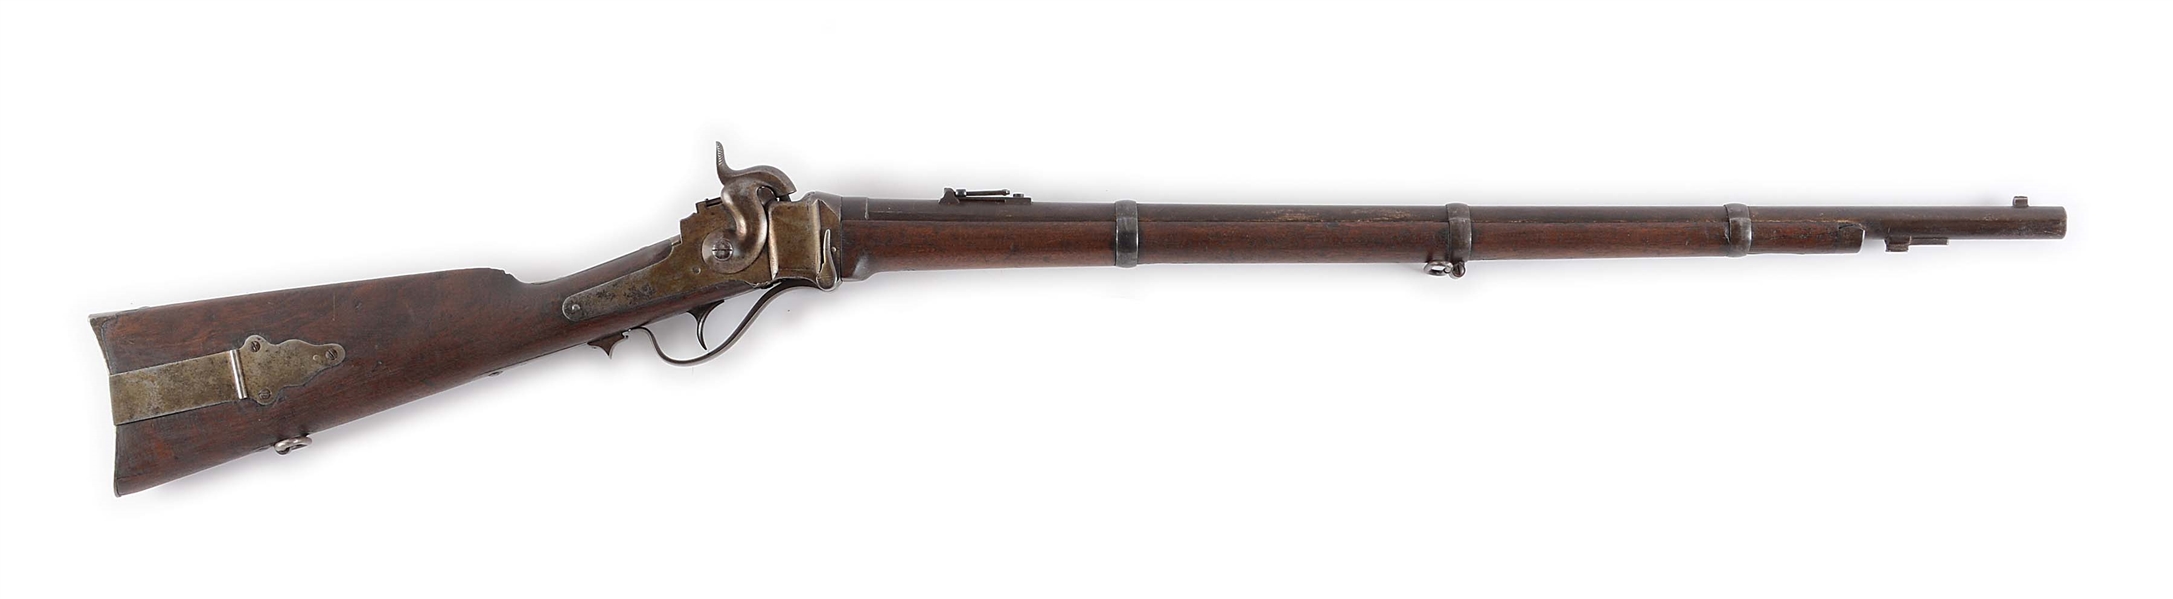 (A) SHARPS NEW MODEL 1859 BREECH LOADING PERCUSSION NAVY CONTRACT RIFLE.